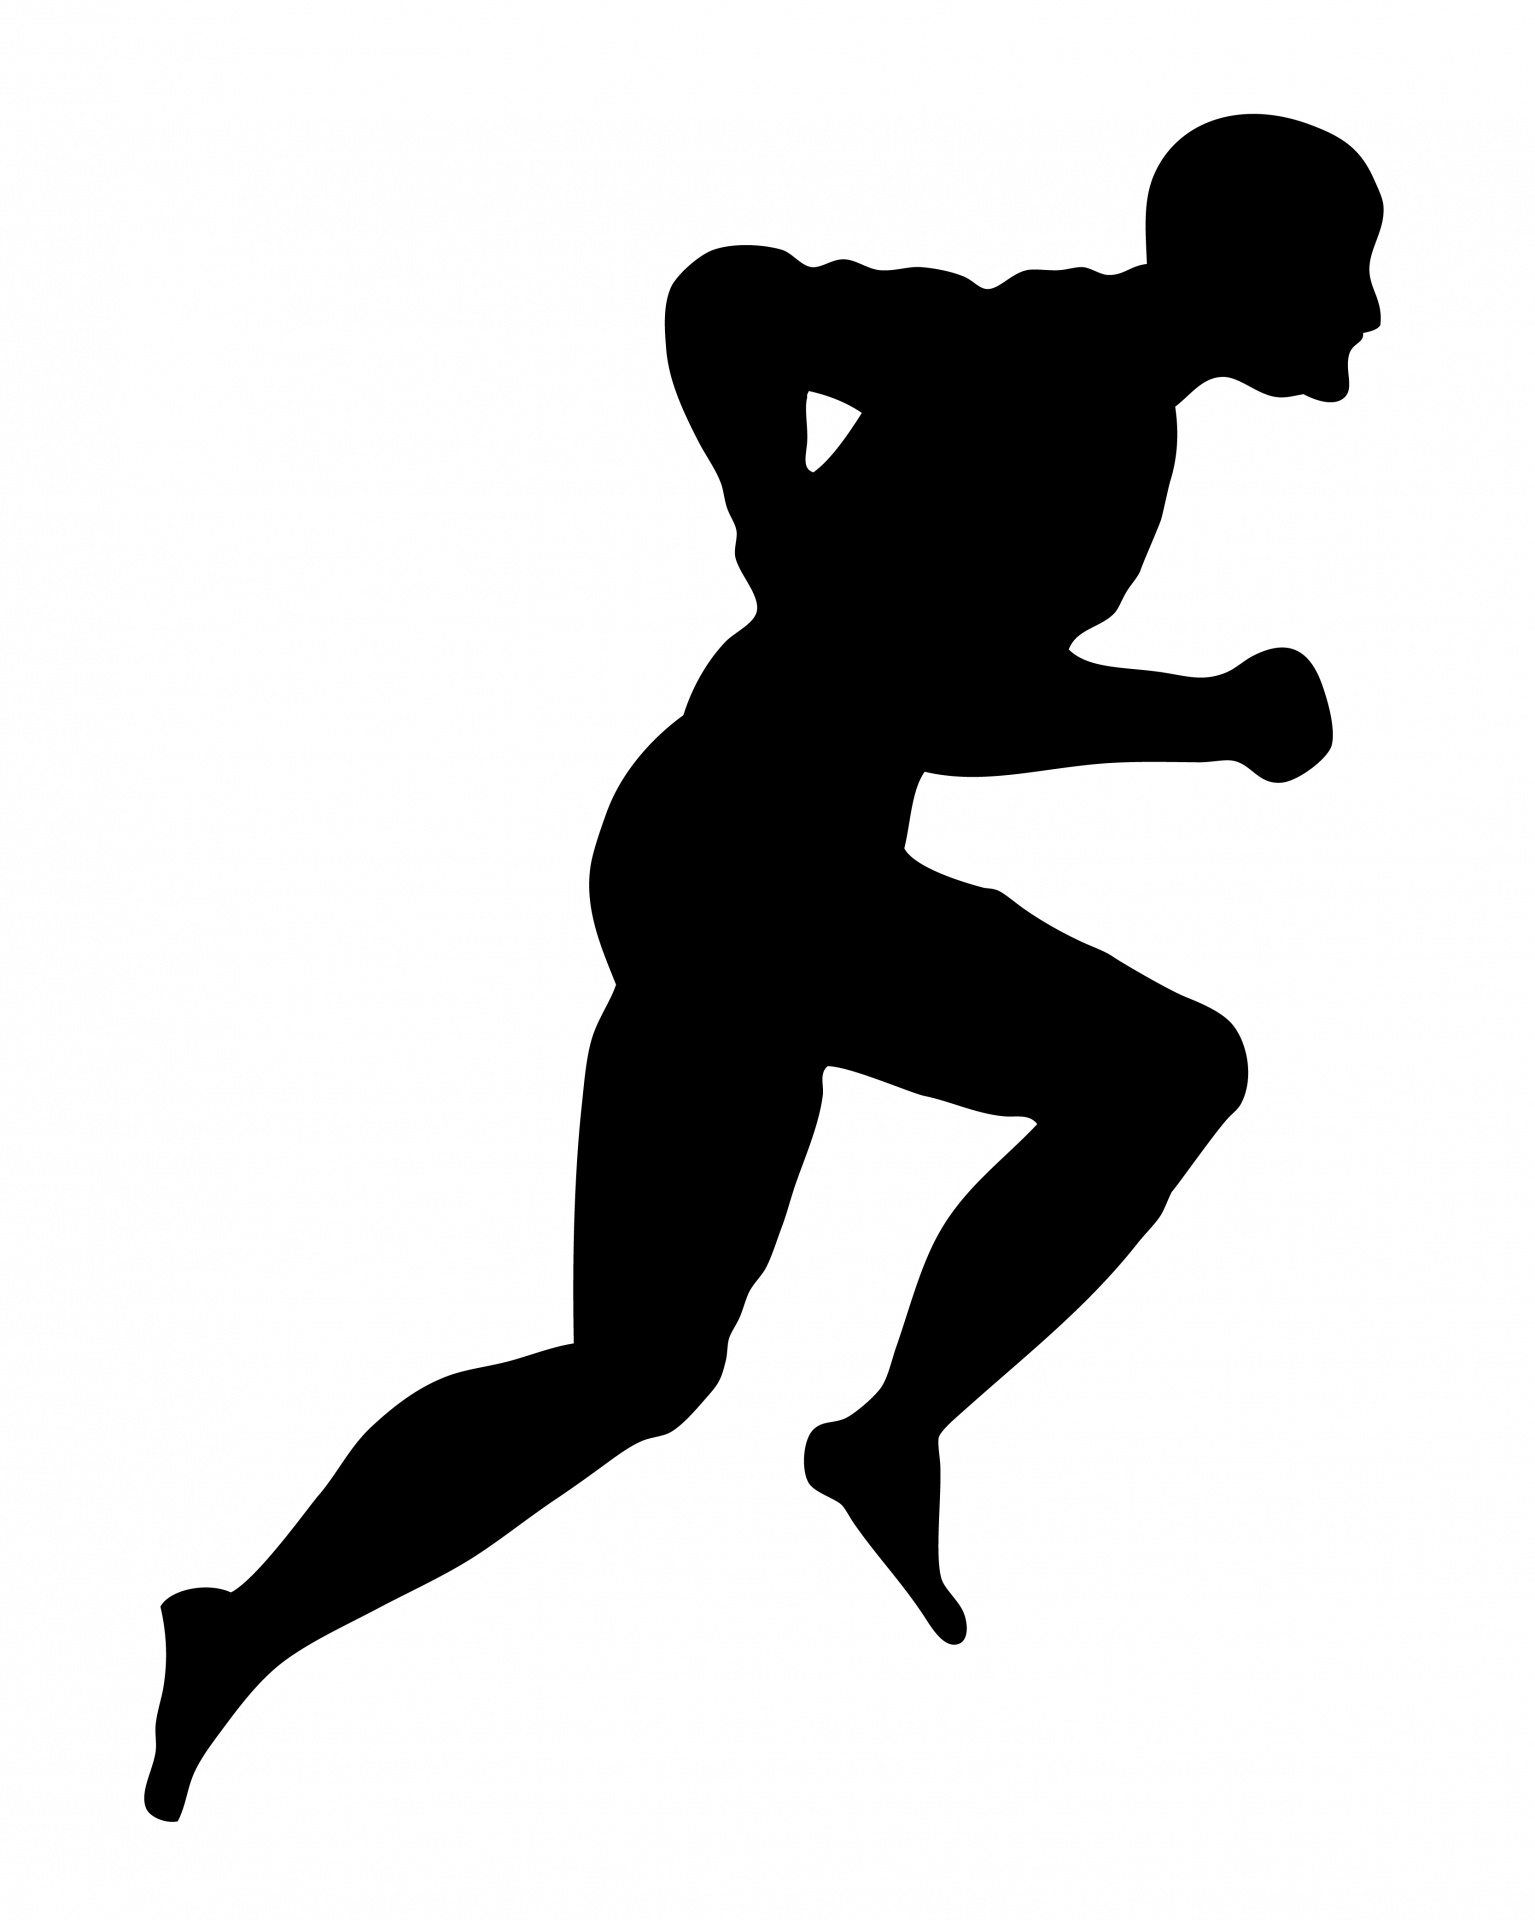 Running man free stock. Athletic clipart silhouette